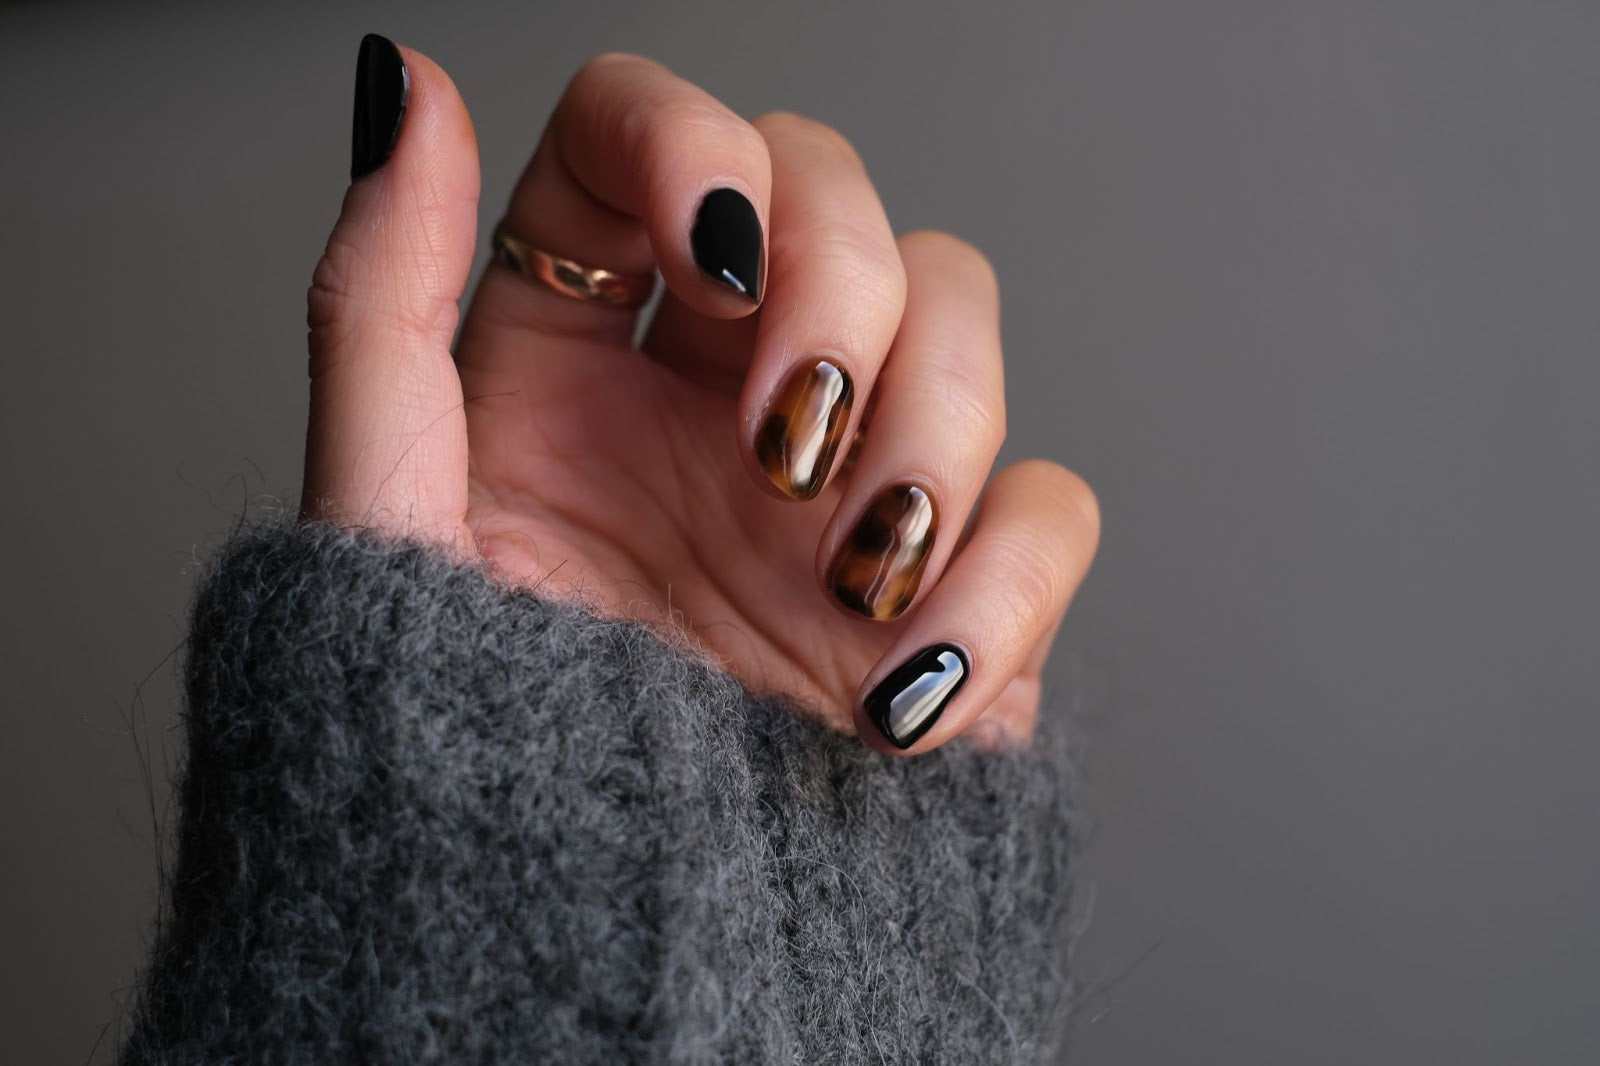 How To Keep Your Nails Strong | Nail Strengthening Tips | DipWell